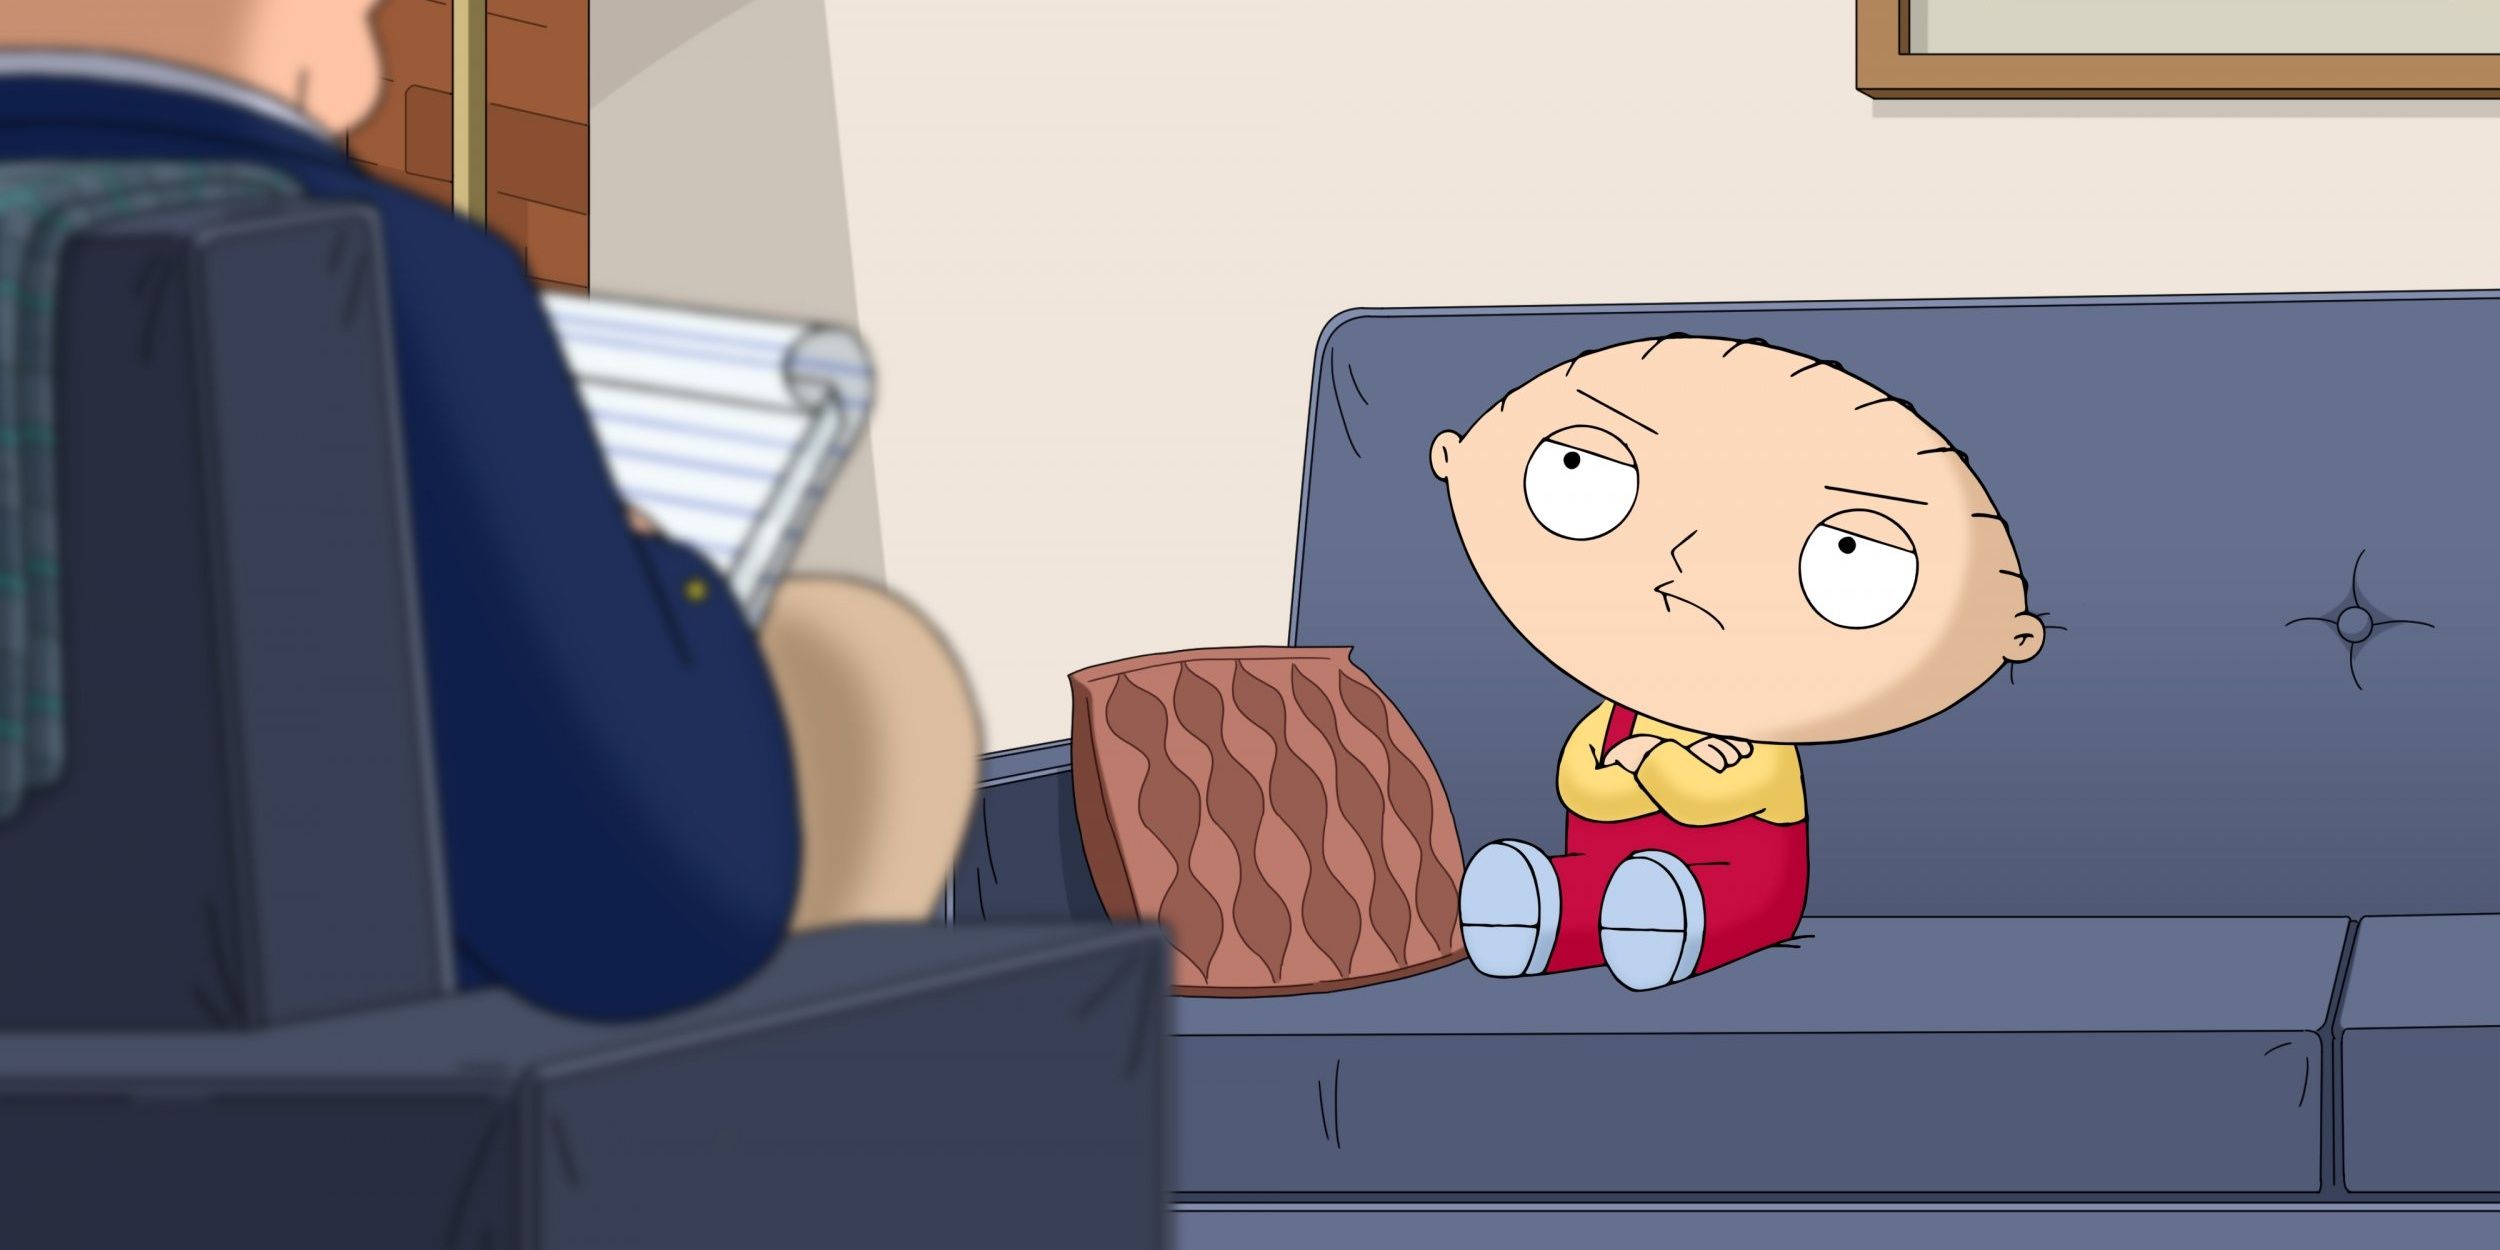 Stewie Griffin sitting on a couch